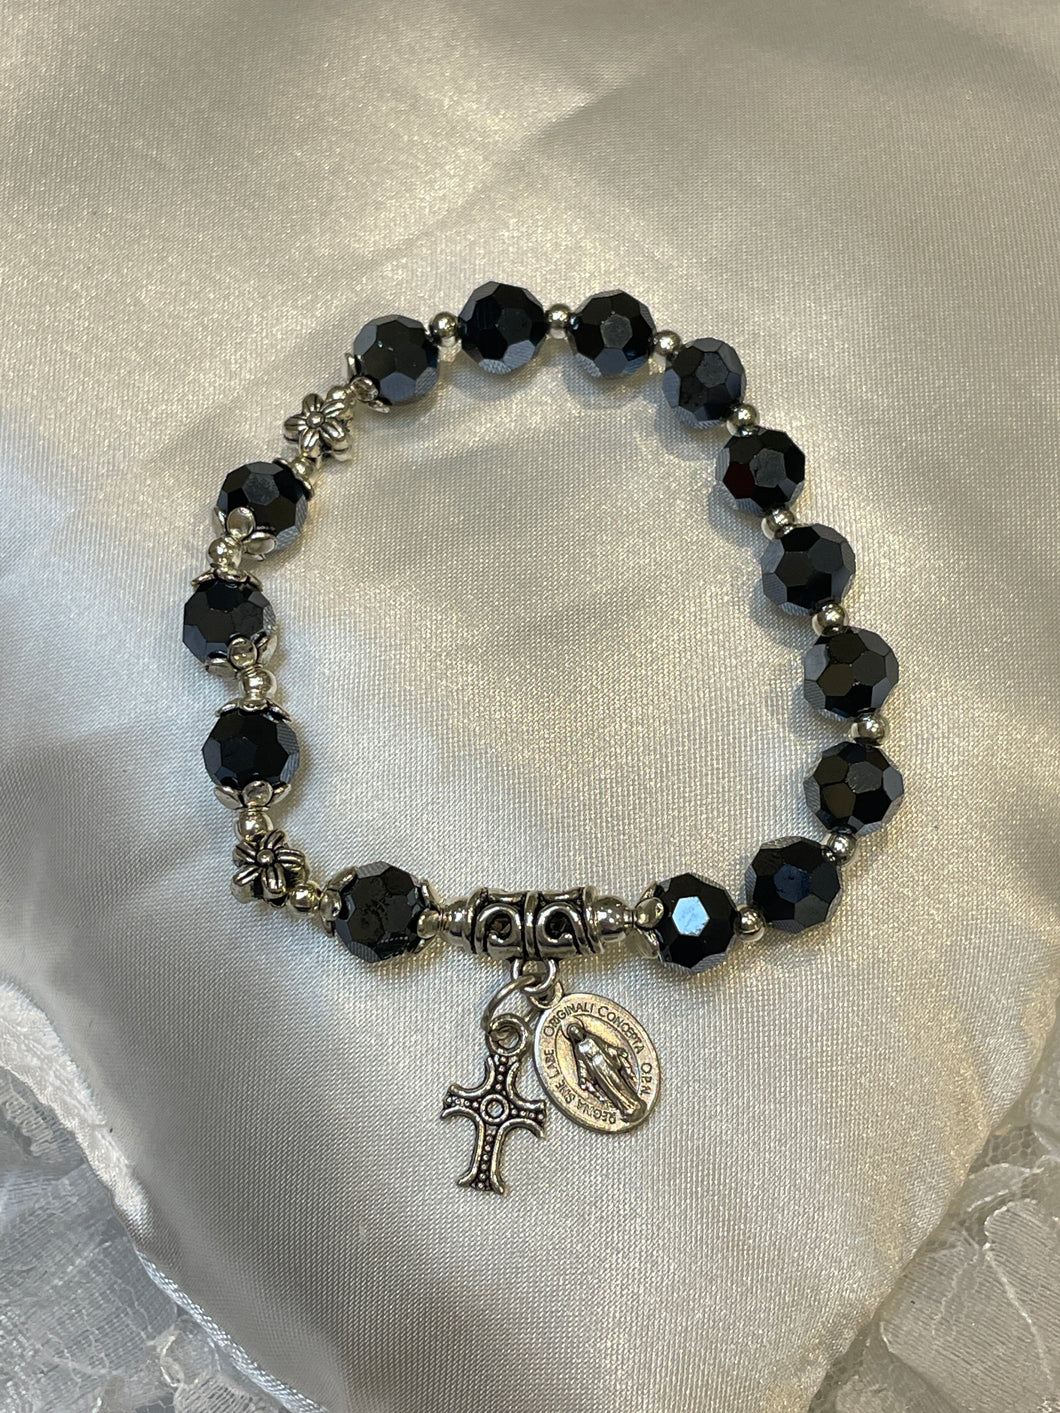 Black Rosary Bracelet with Charms